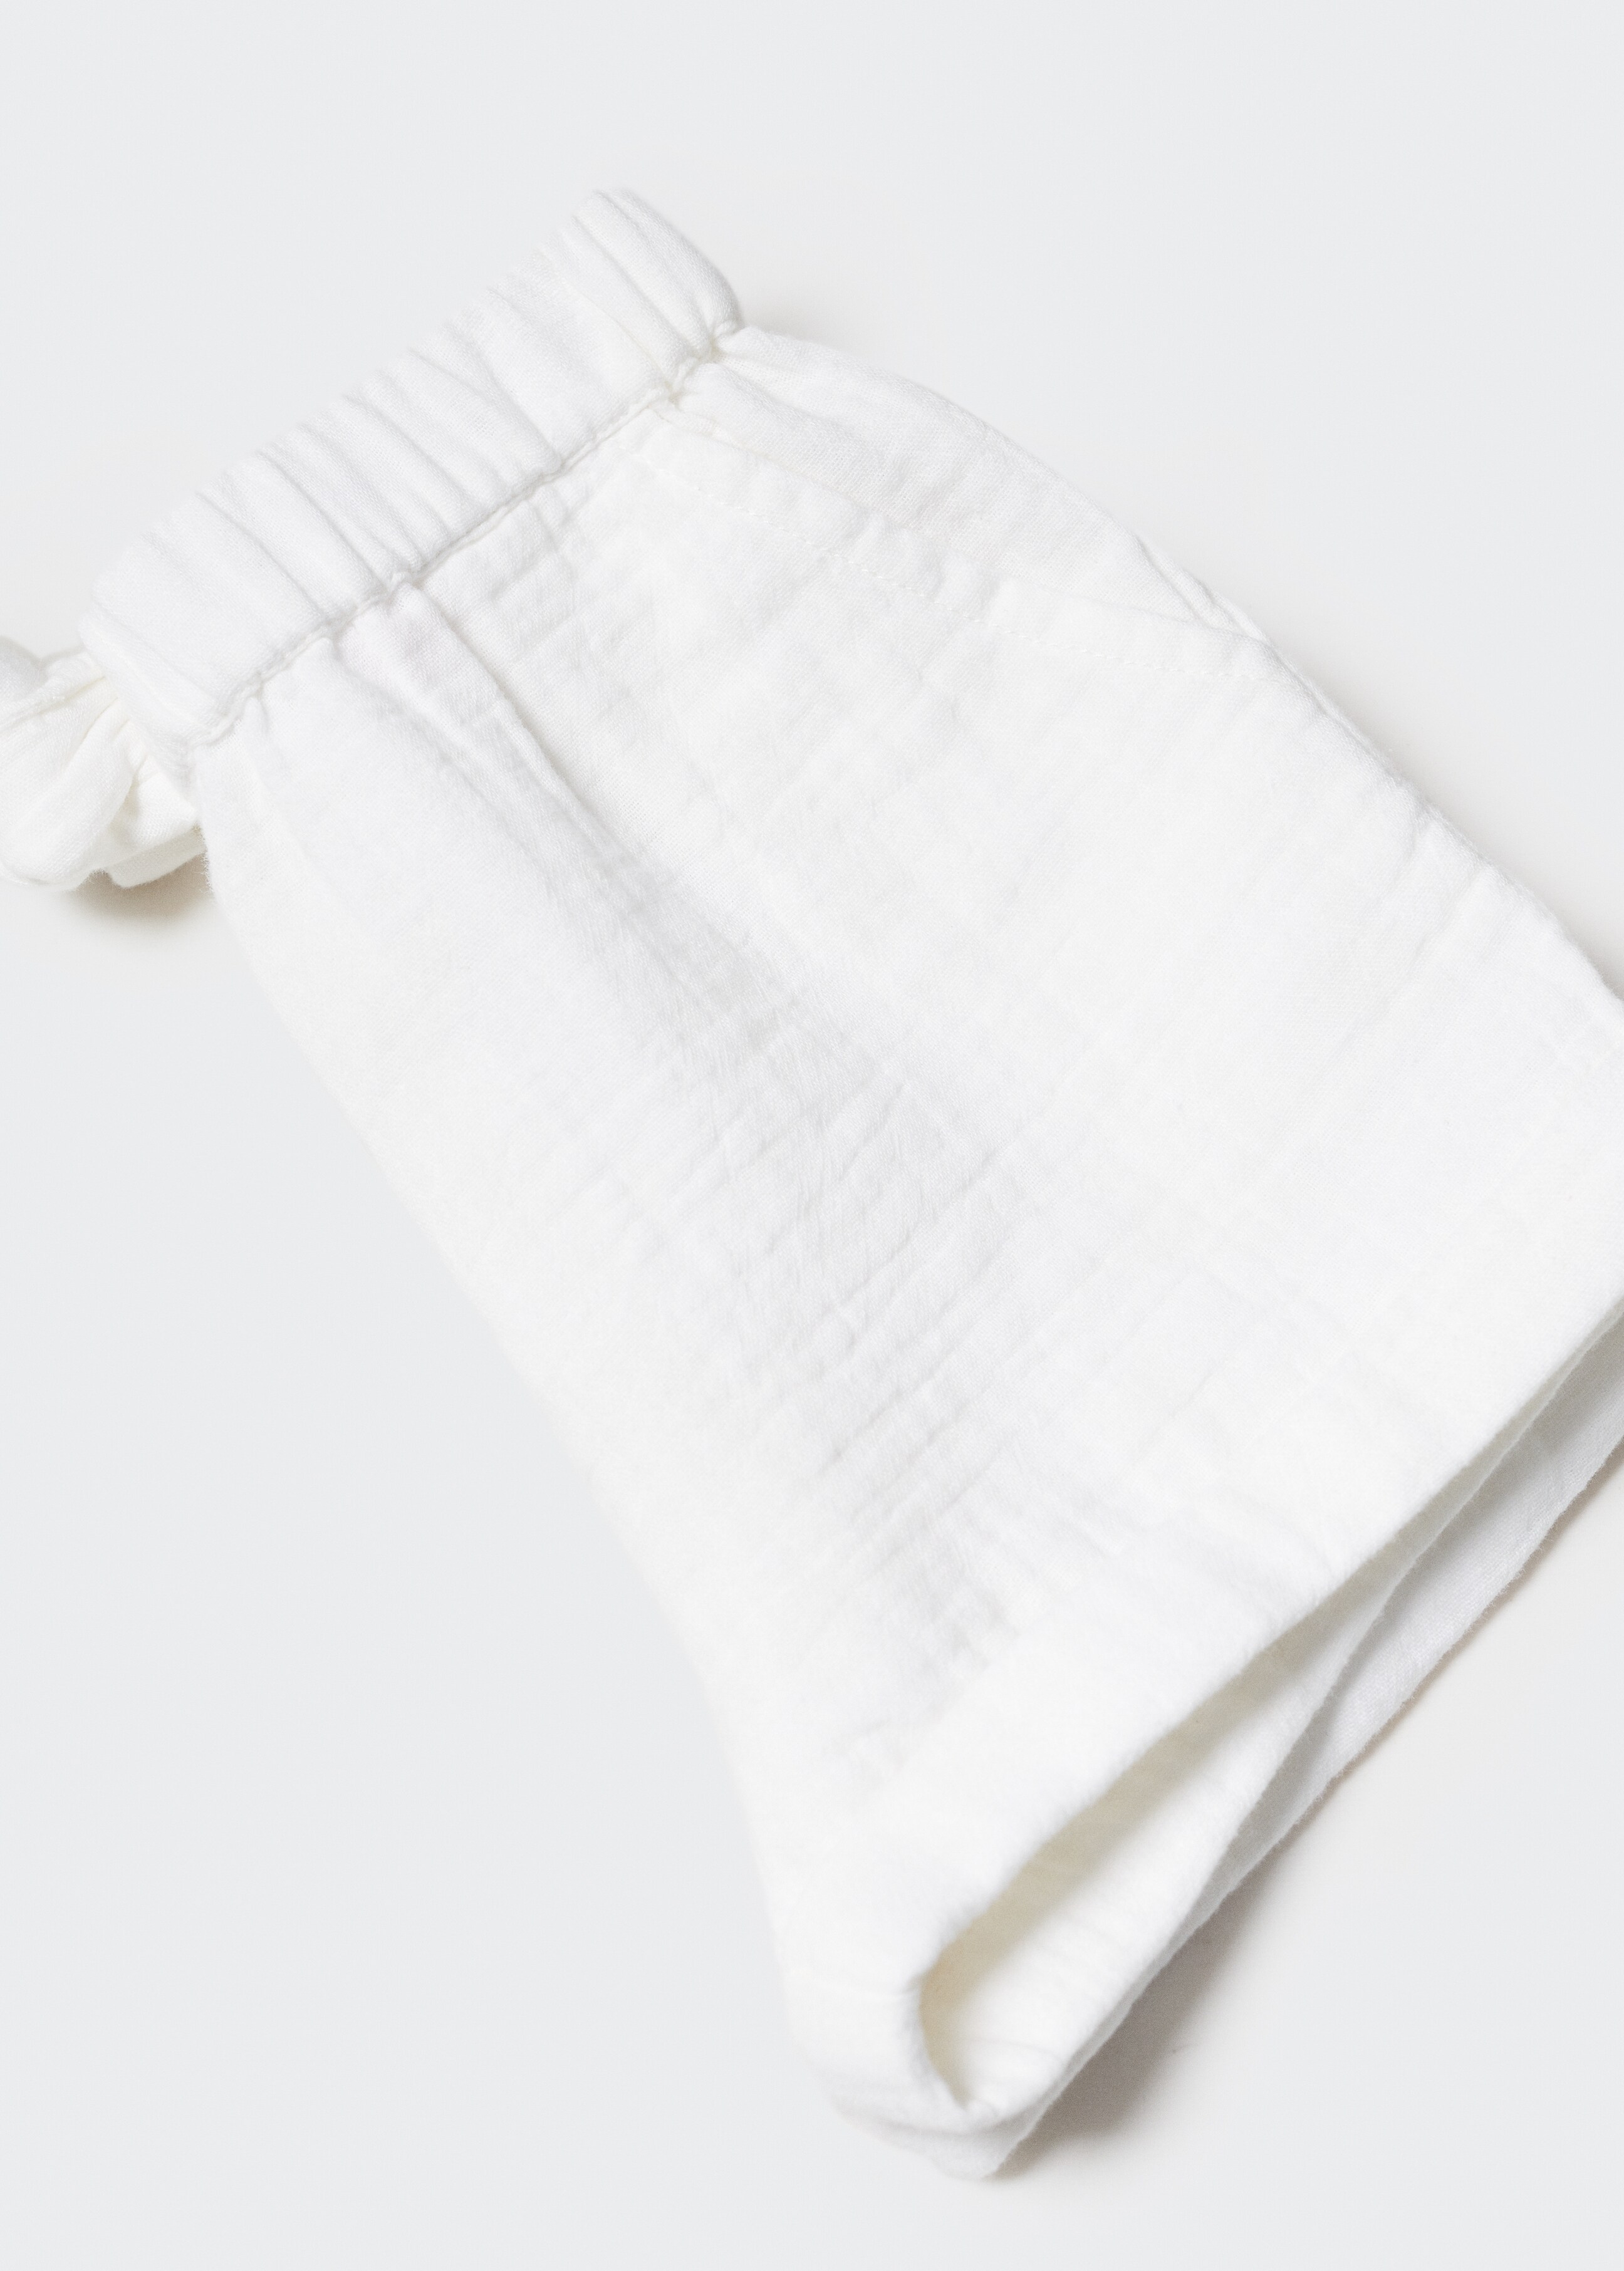 Stretch cotton shorts - Details of the article 8